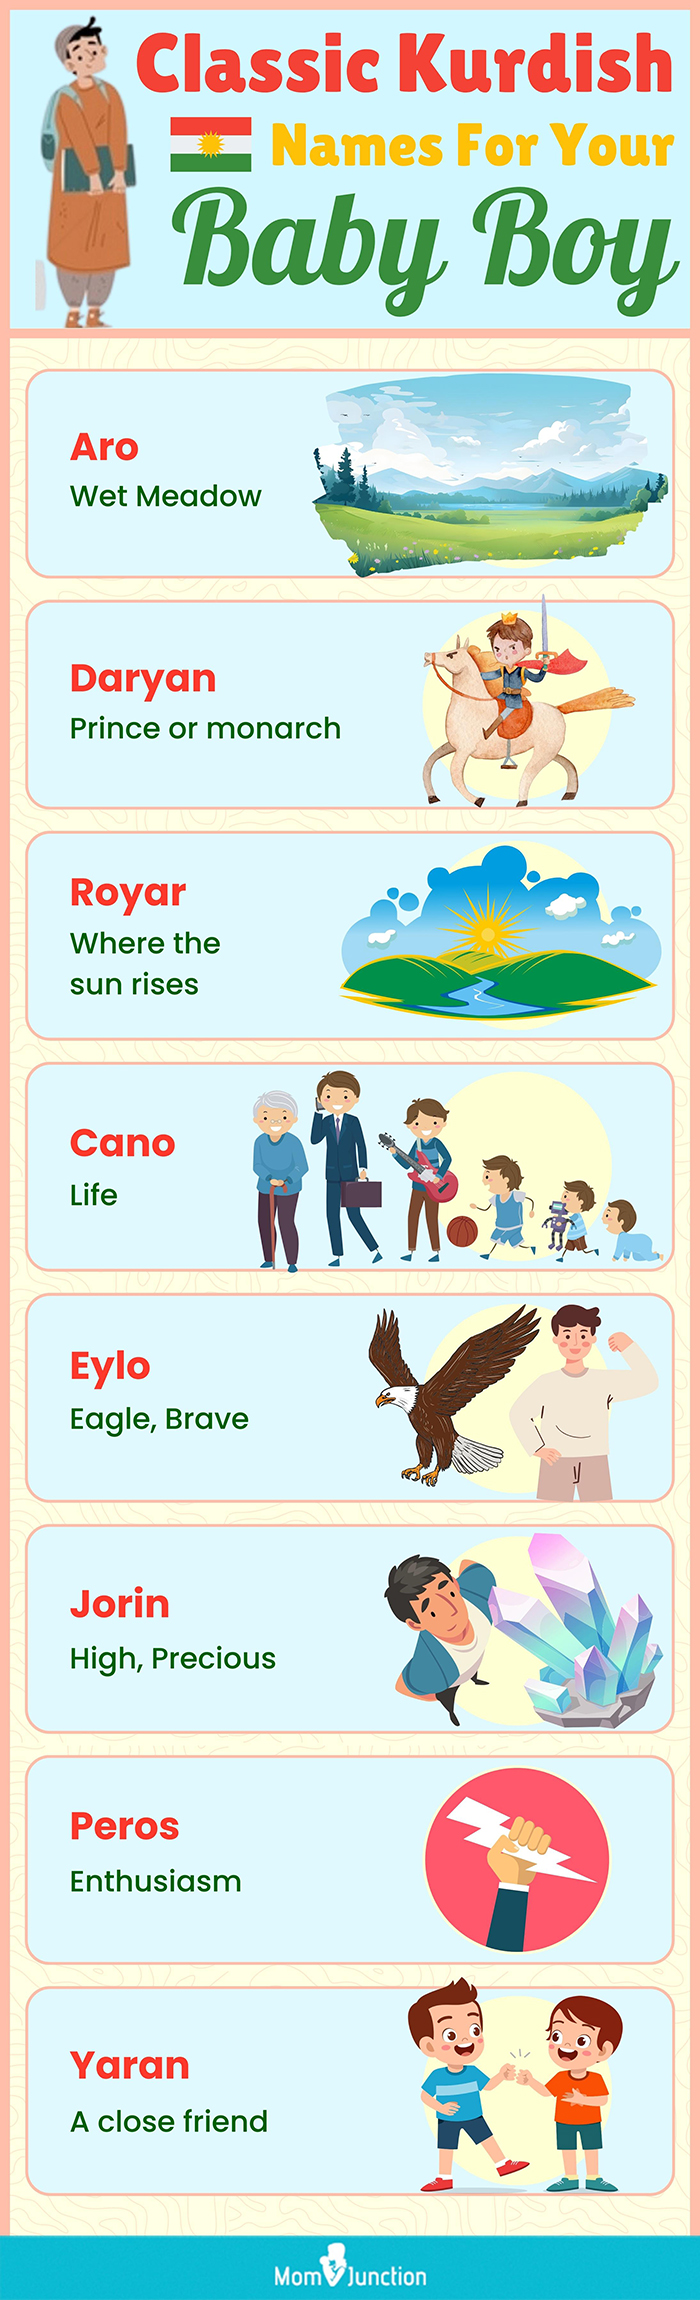 classic kurdish names for your baby boy (infographic)